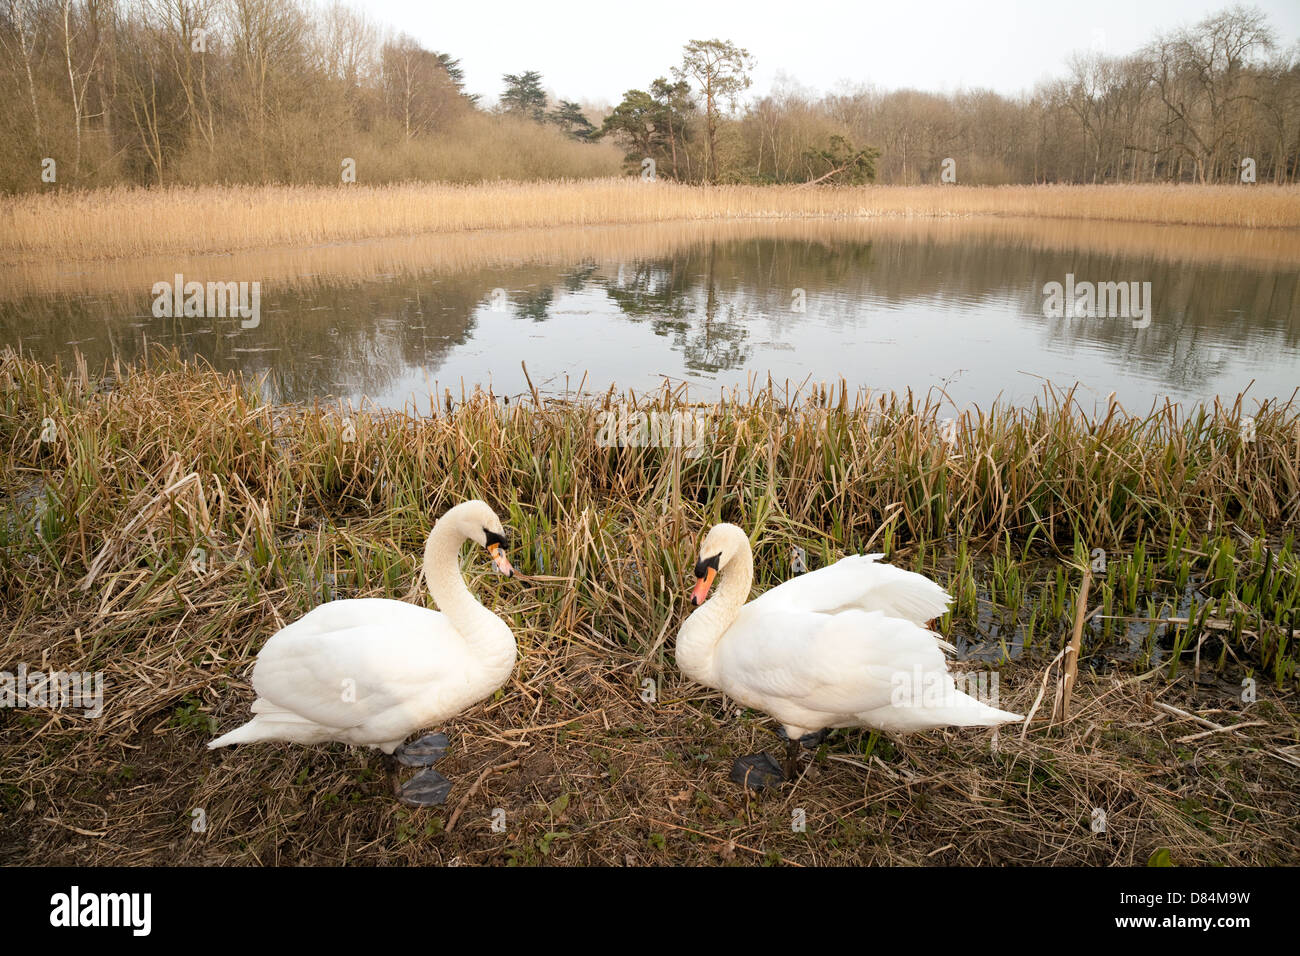 A pair couple of swans by Fairy Lake, Ickworth, Suffolk British English Countryside, East Anglia UK Stock Photo